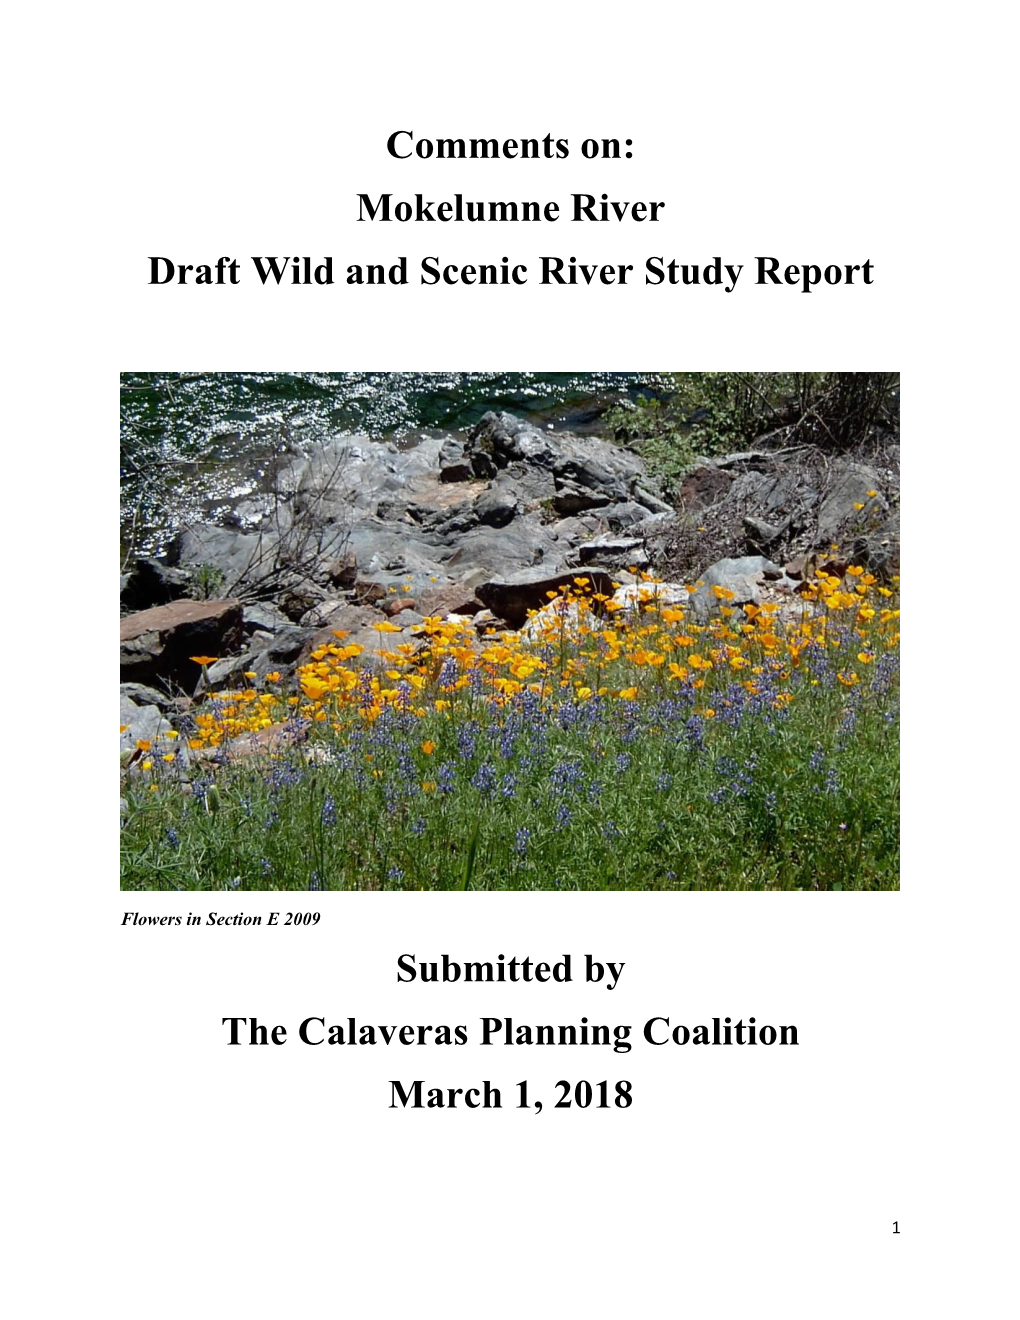 Comments On: Mokelumne River Draft Wild and Scenic River Study Report